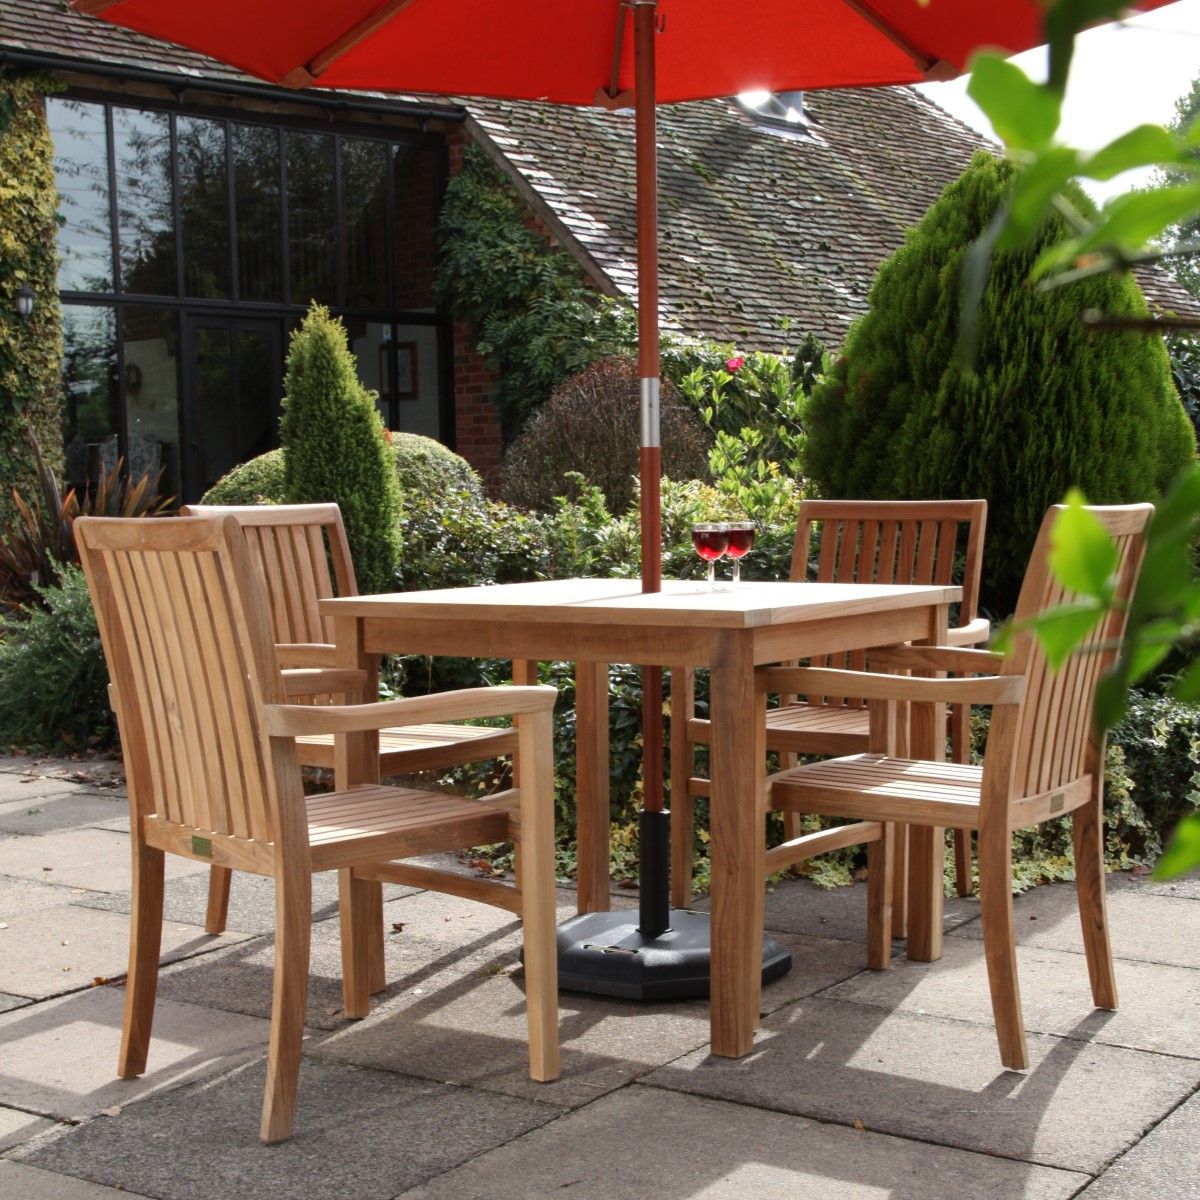 Teak Square Outdoor Dining Table And Chairs Set | Woodberry For Teak Folding Chair Patio Dining Sets (View 12 of 15)